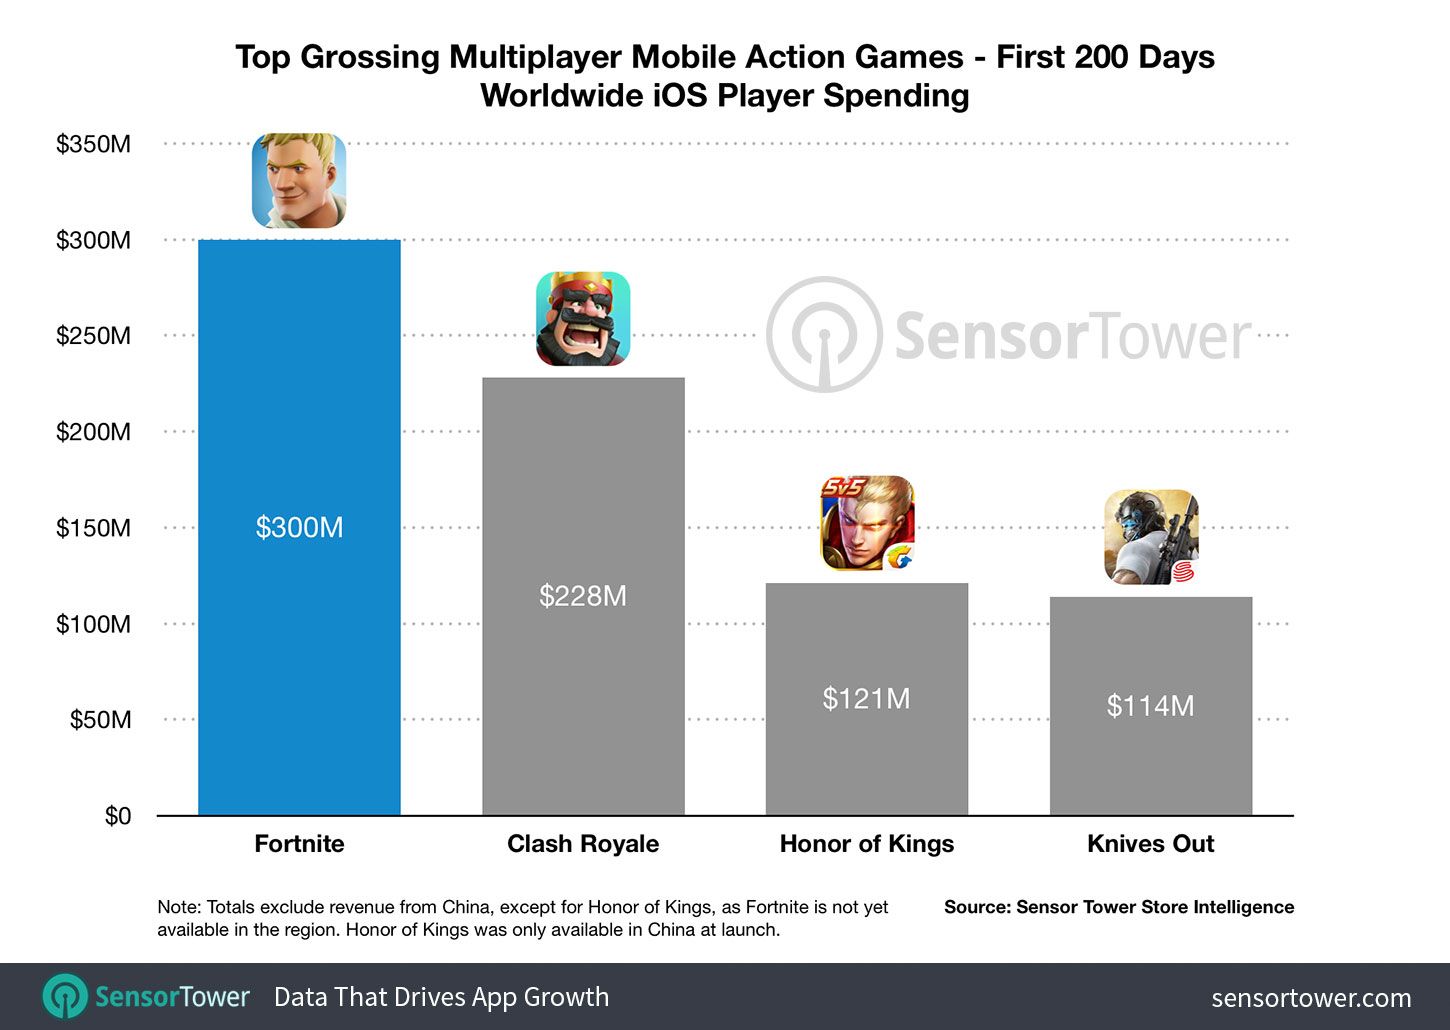 Fortnite Has Made $300 Million In 200 Days On iOS